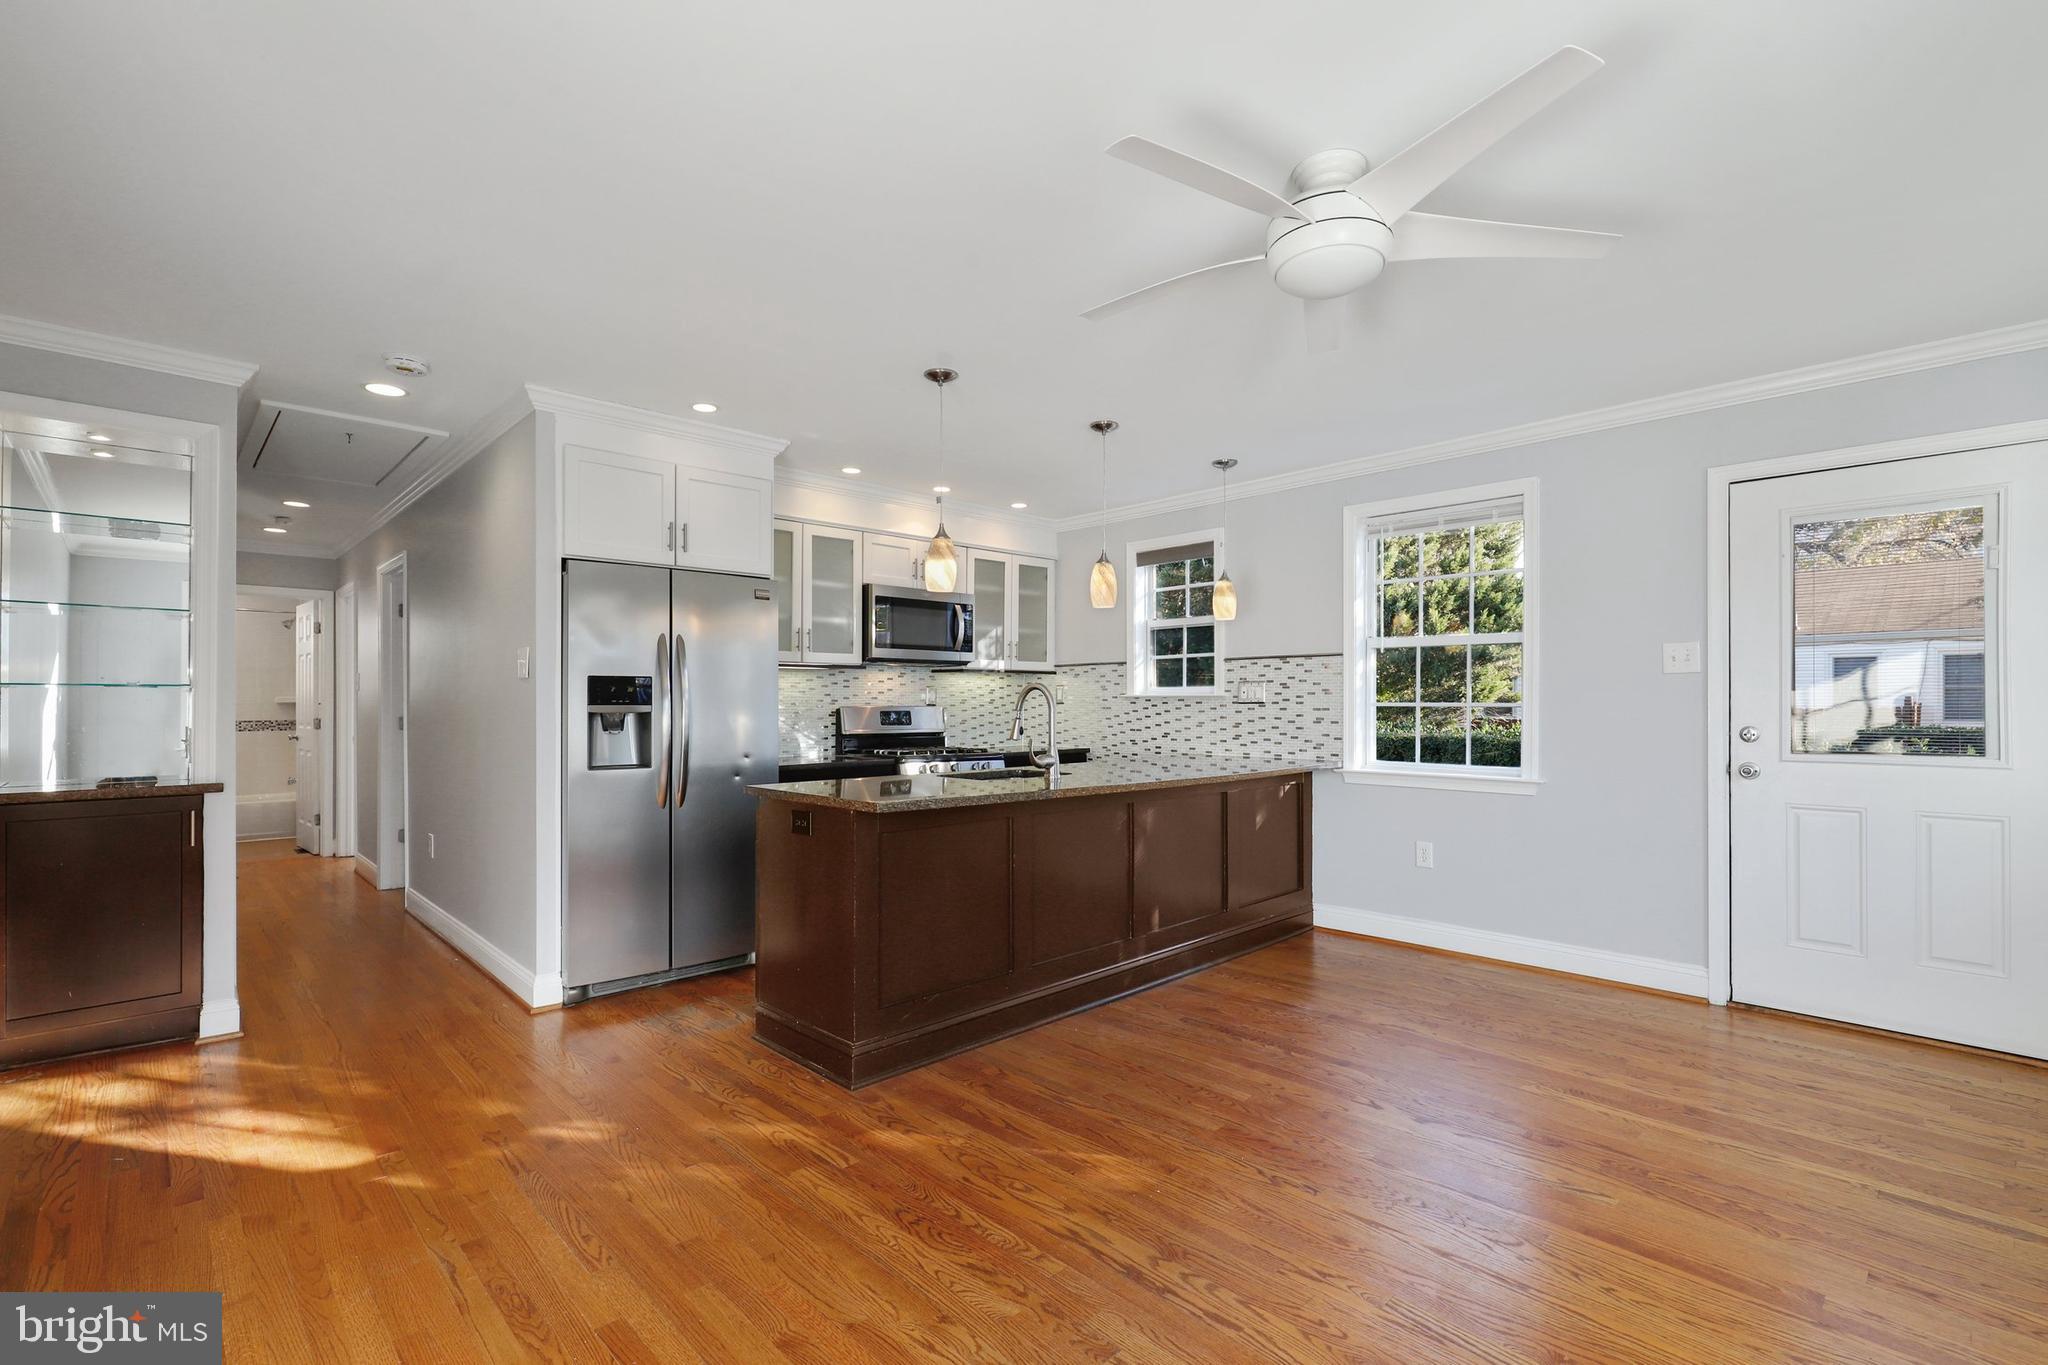 a large kitchen with stainless steel appliances kitchen island granite countertop a refrigerator a sink a stove a dining table and chairs with wooden floor